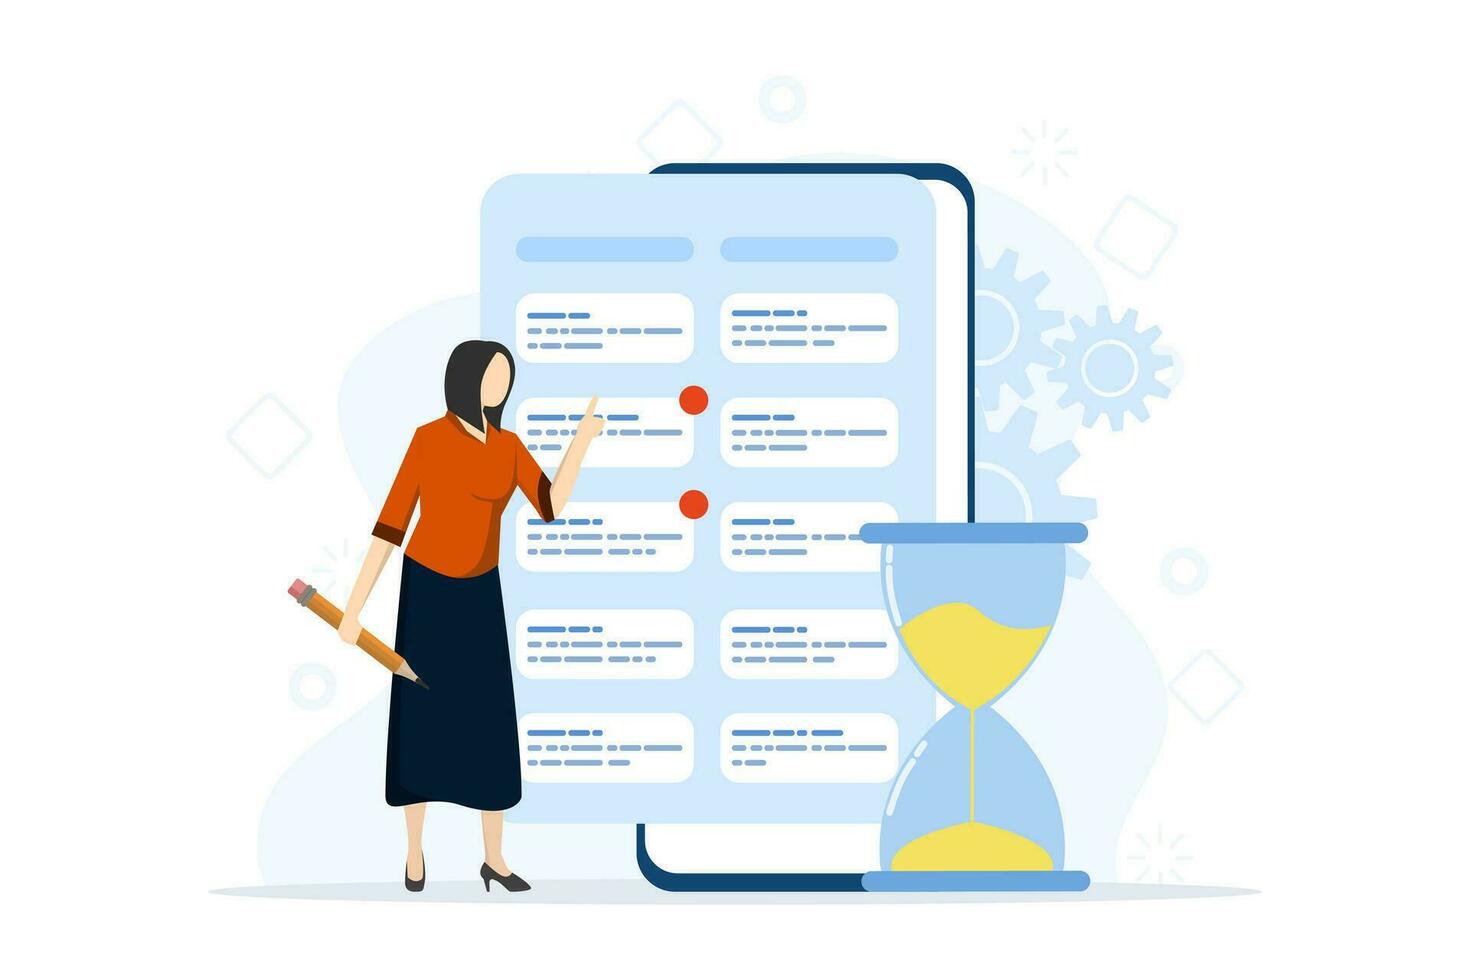 Time management concept of schedule, deadline, planner, planning and organization, man organizes workflow and makes daily to-do list, marking dates or tasks on calendar, time management scene. vector